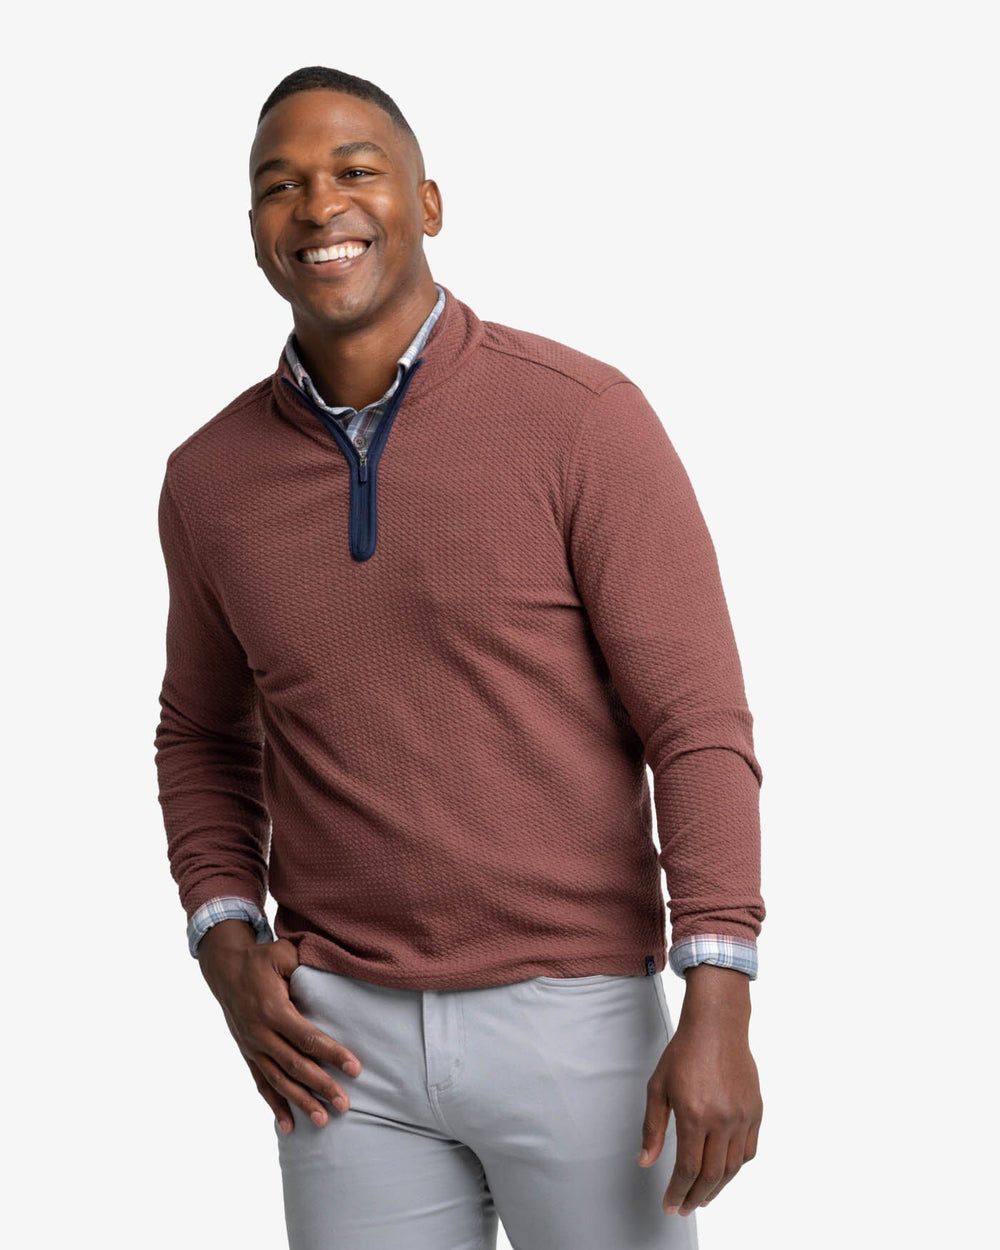 The front view of the Southern Tide Heather Outbound Quarter Zip by Southern Tide - Heather Bordeaux Red